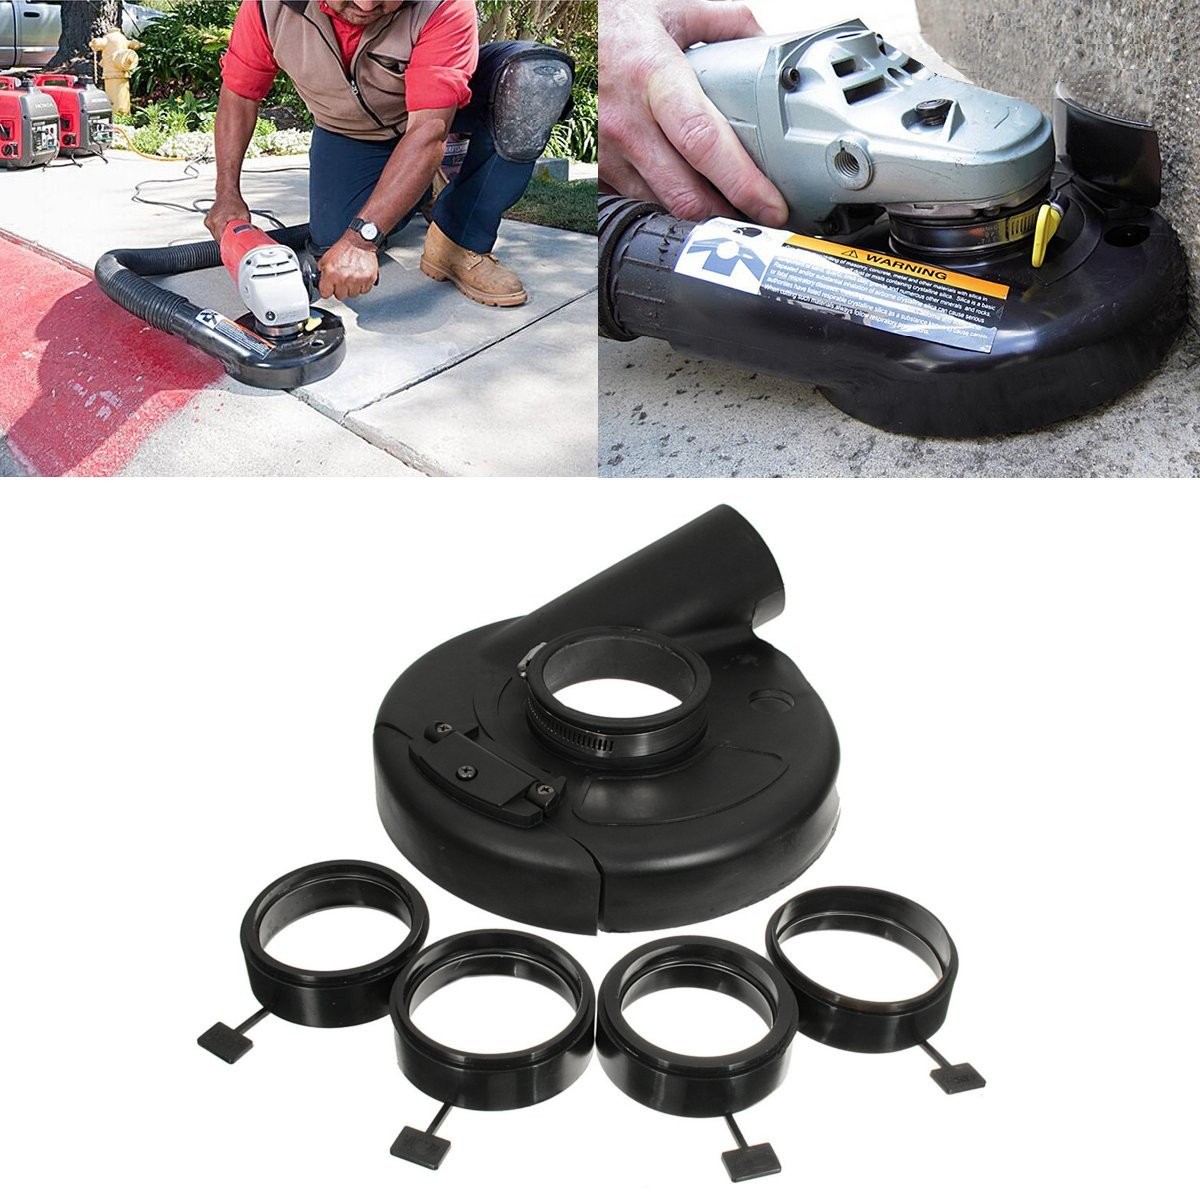 18cm-Black-Vacuum-Dust-Shroud-Cover-for-Angle-Grinder-Hand-Grind-Convertible-1191601-1